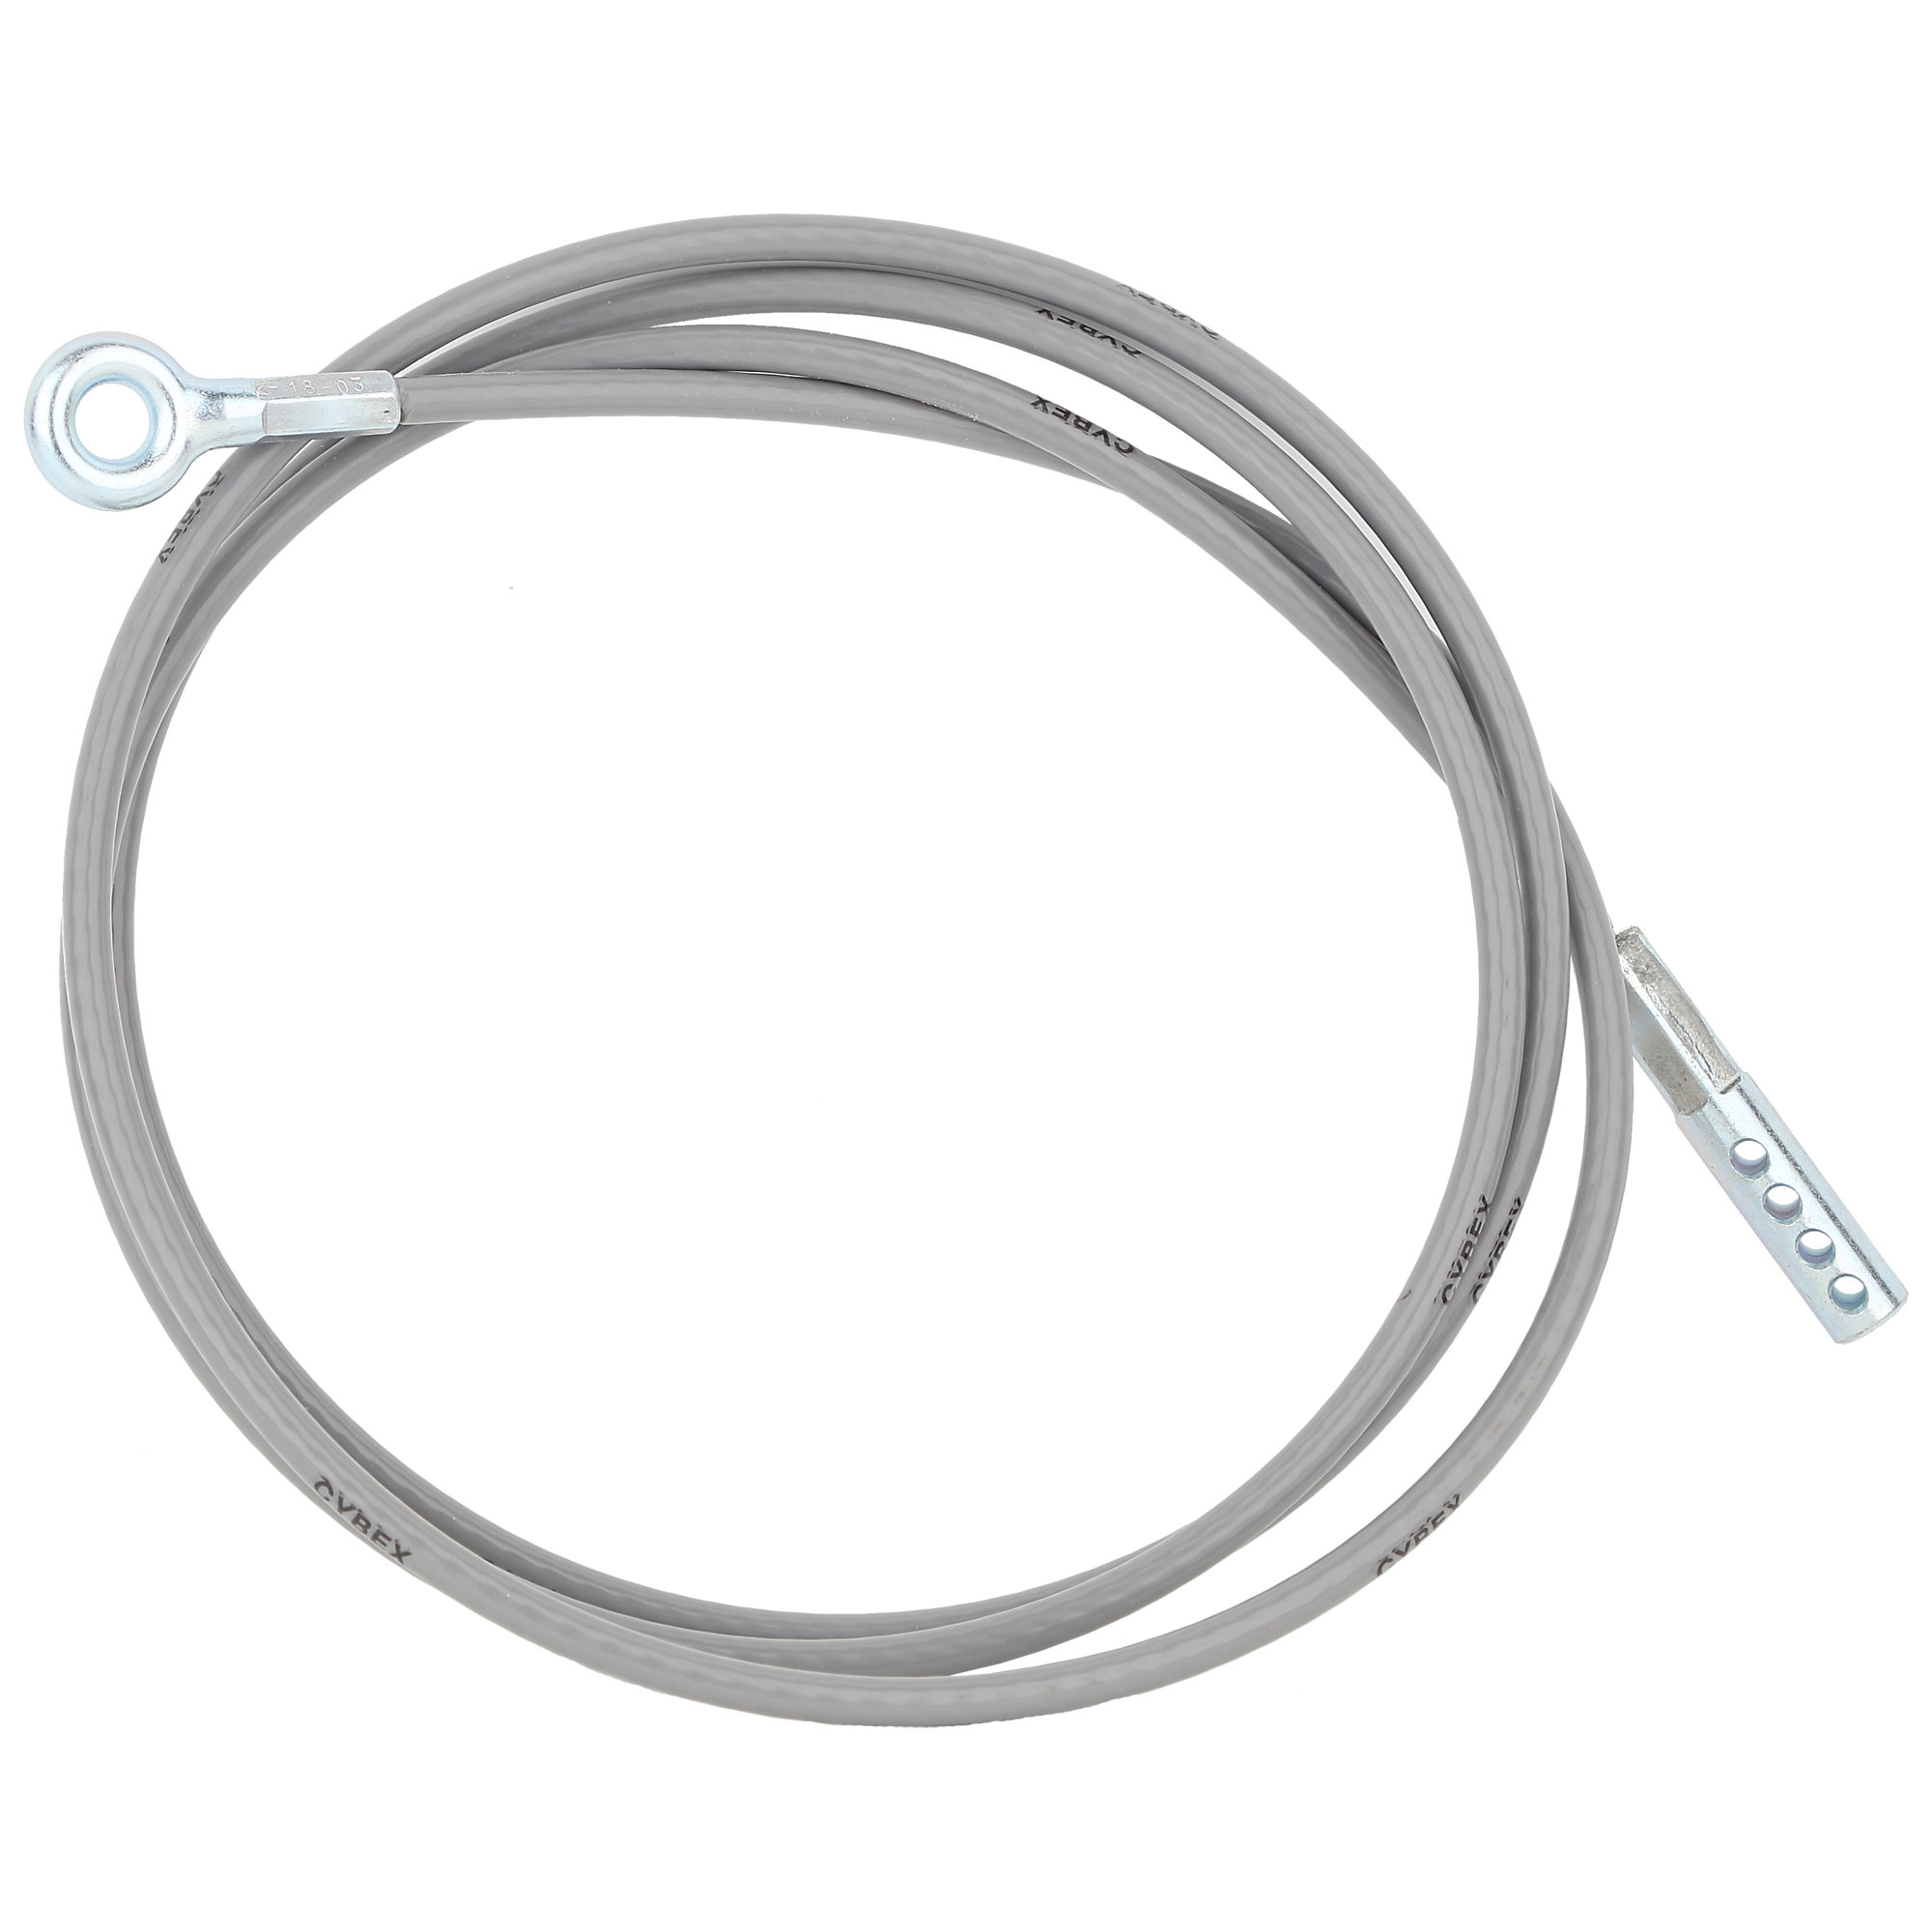 Cable for certain Strength Machines by Cybex 17071-002